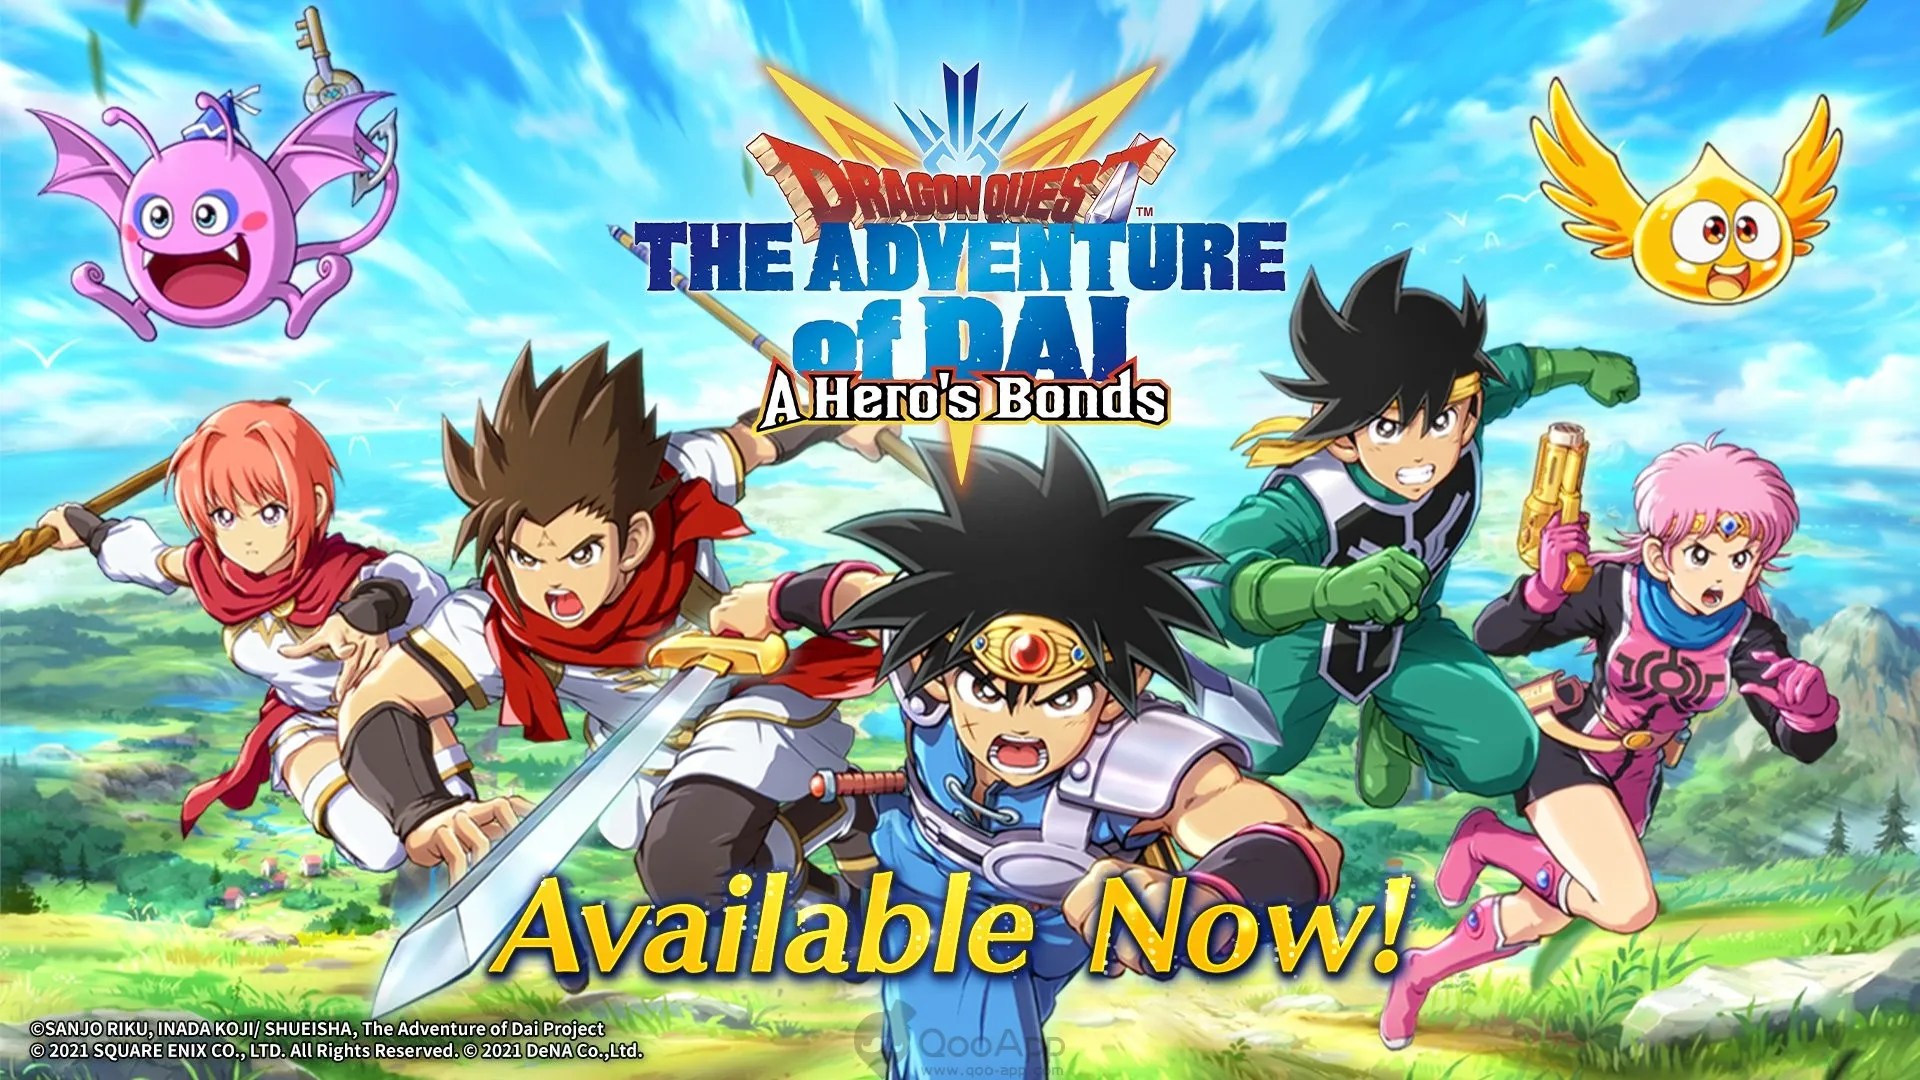 Dragon Quest The Adventure of Dai: A Hero's Bonds Now Available for Download!